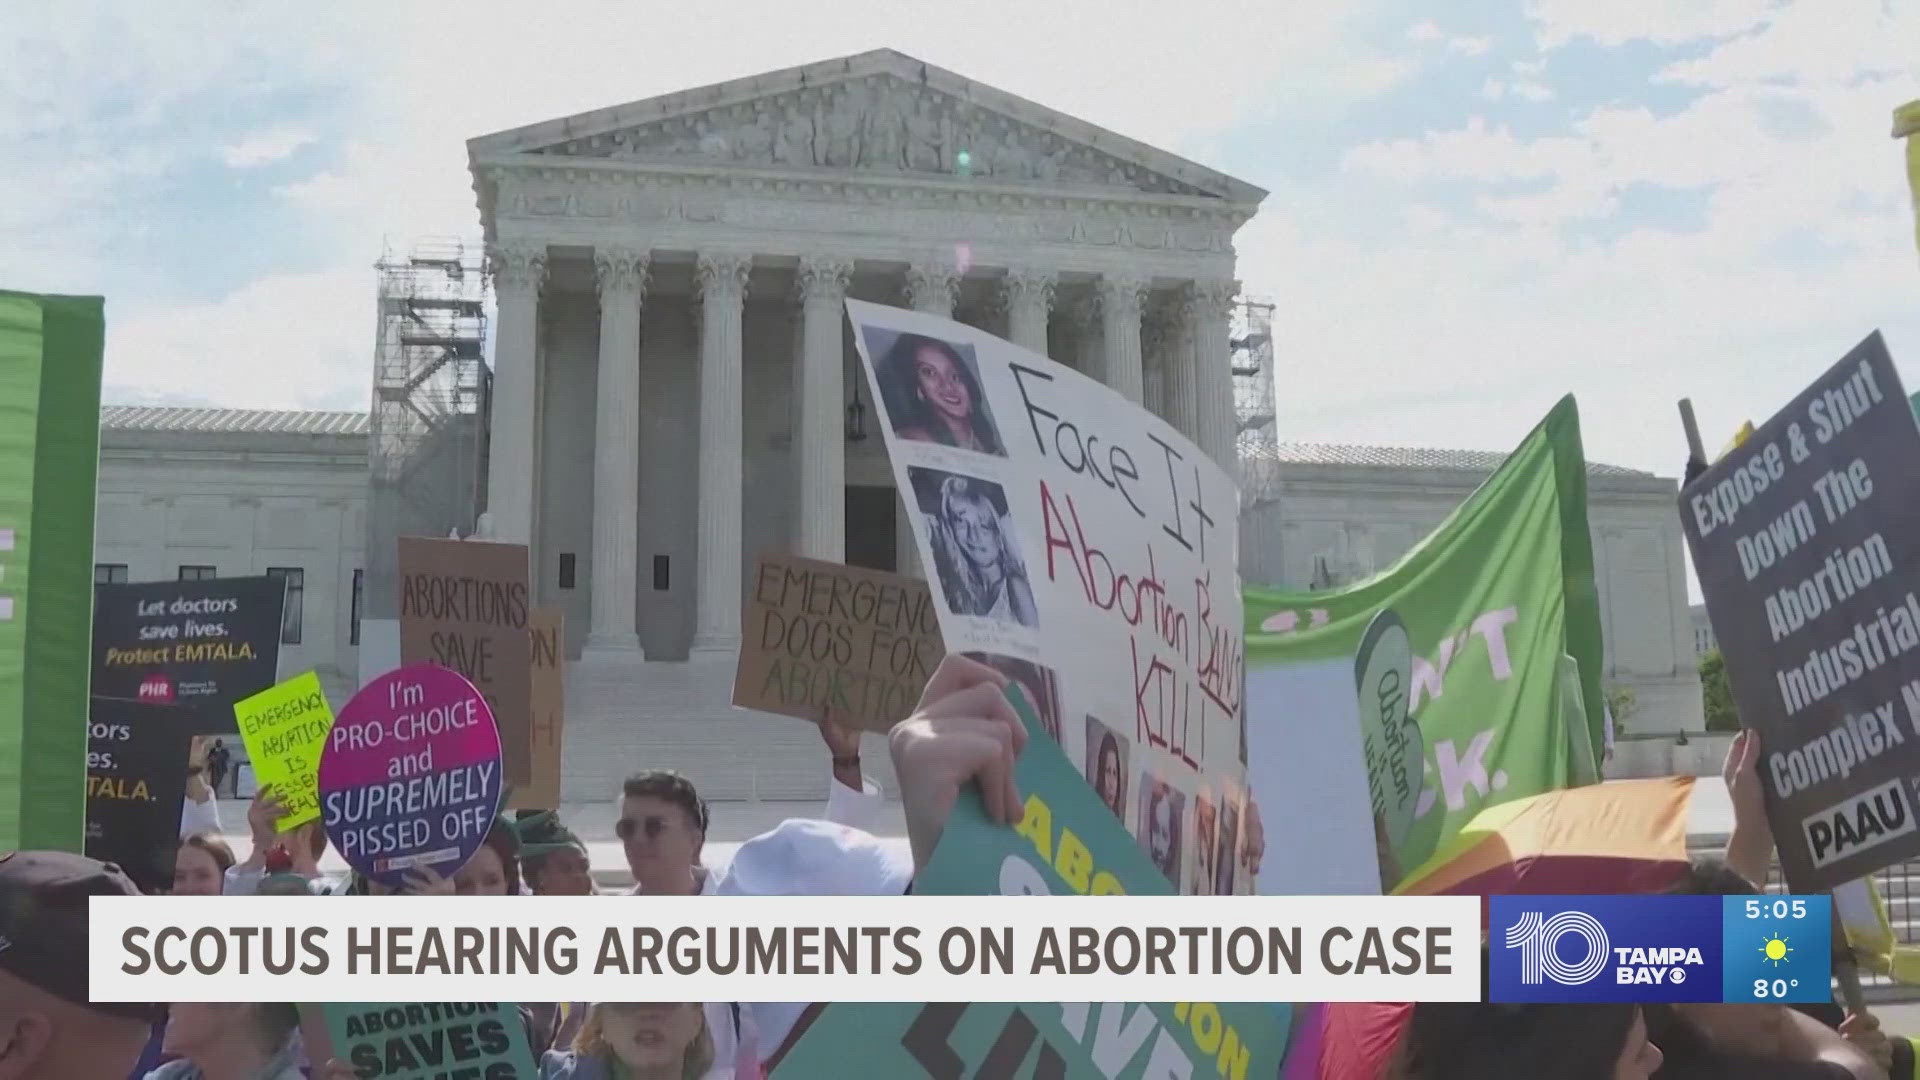 Protestors gathered in Washington, D.C. on Wednesday to call for action from Supreme Court justices.